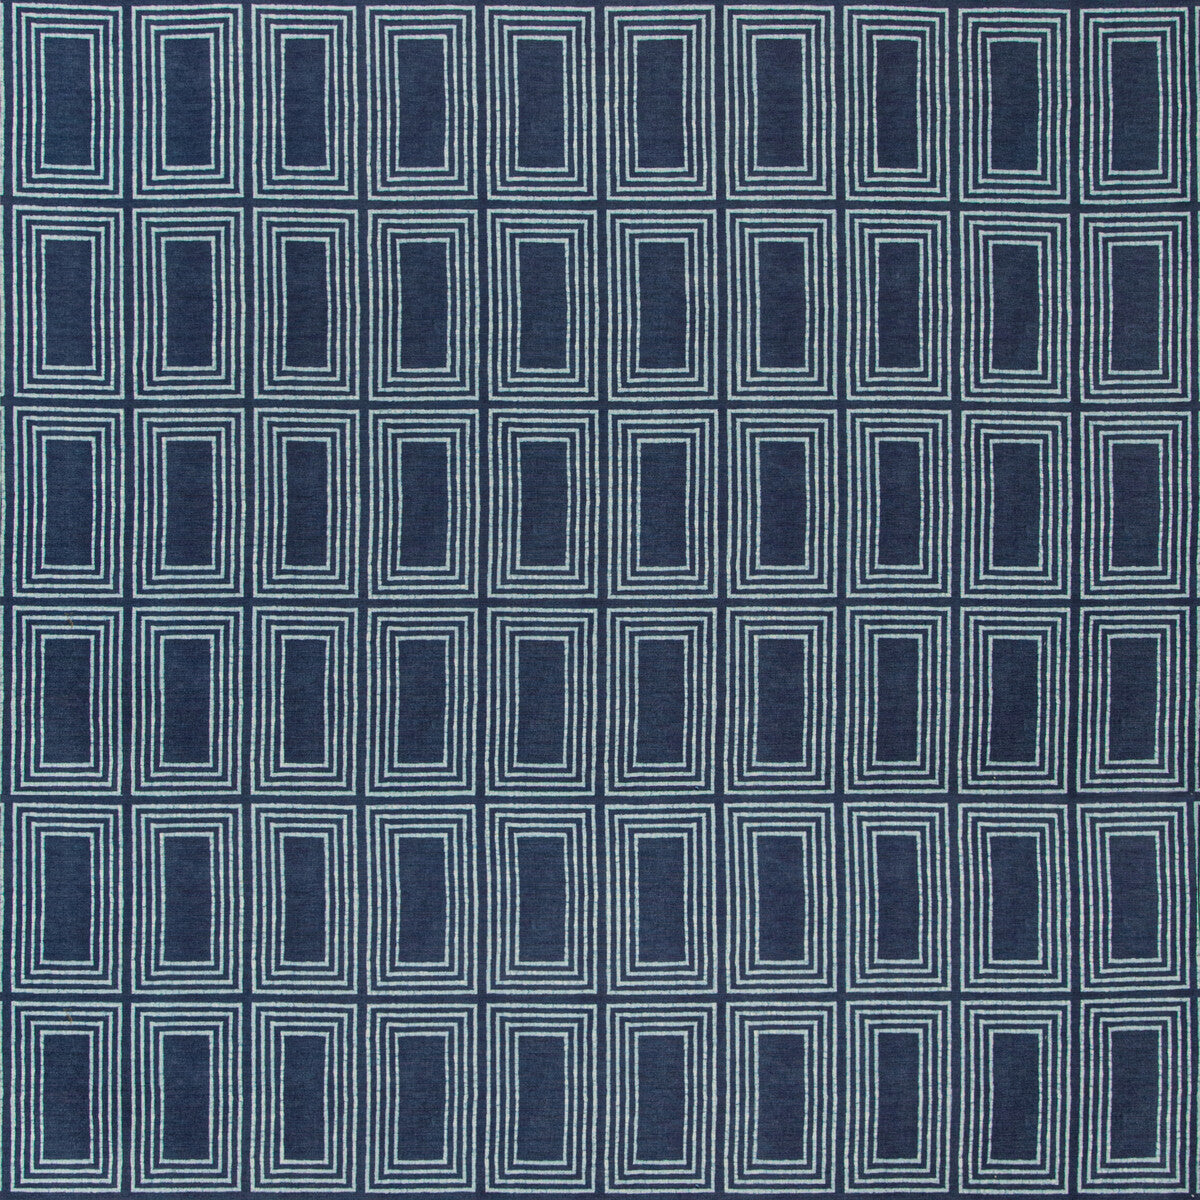 Cadre fabric in indigo color - pattern 2019126.501.0 - by Lee Jofa